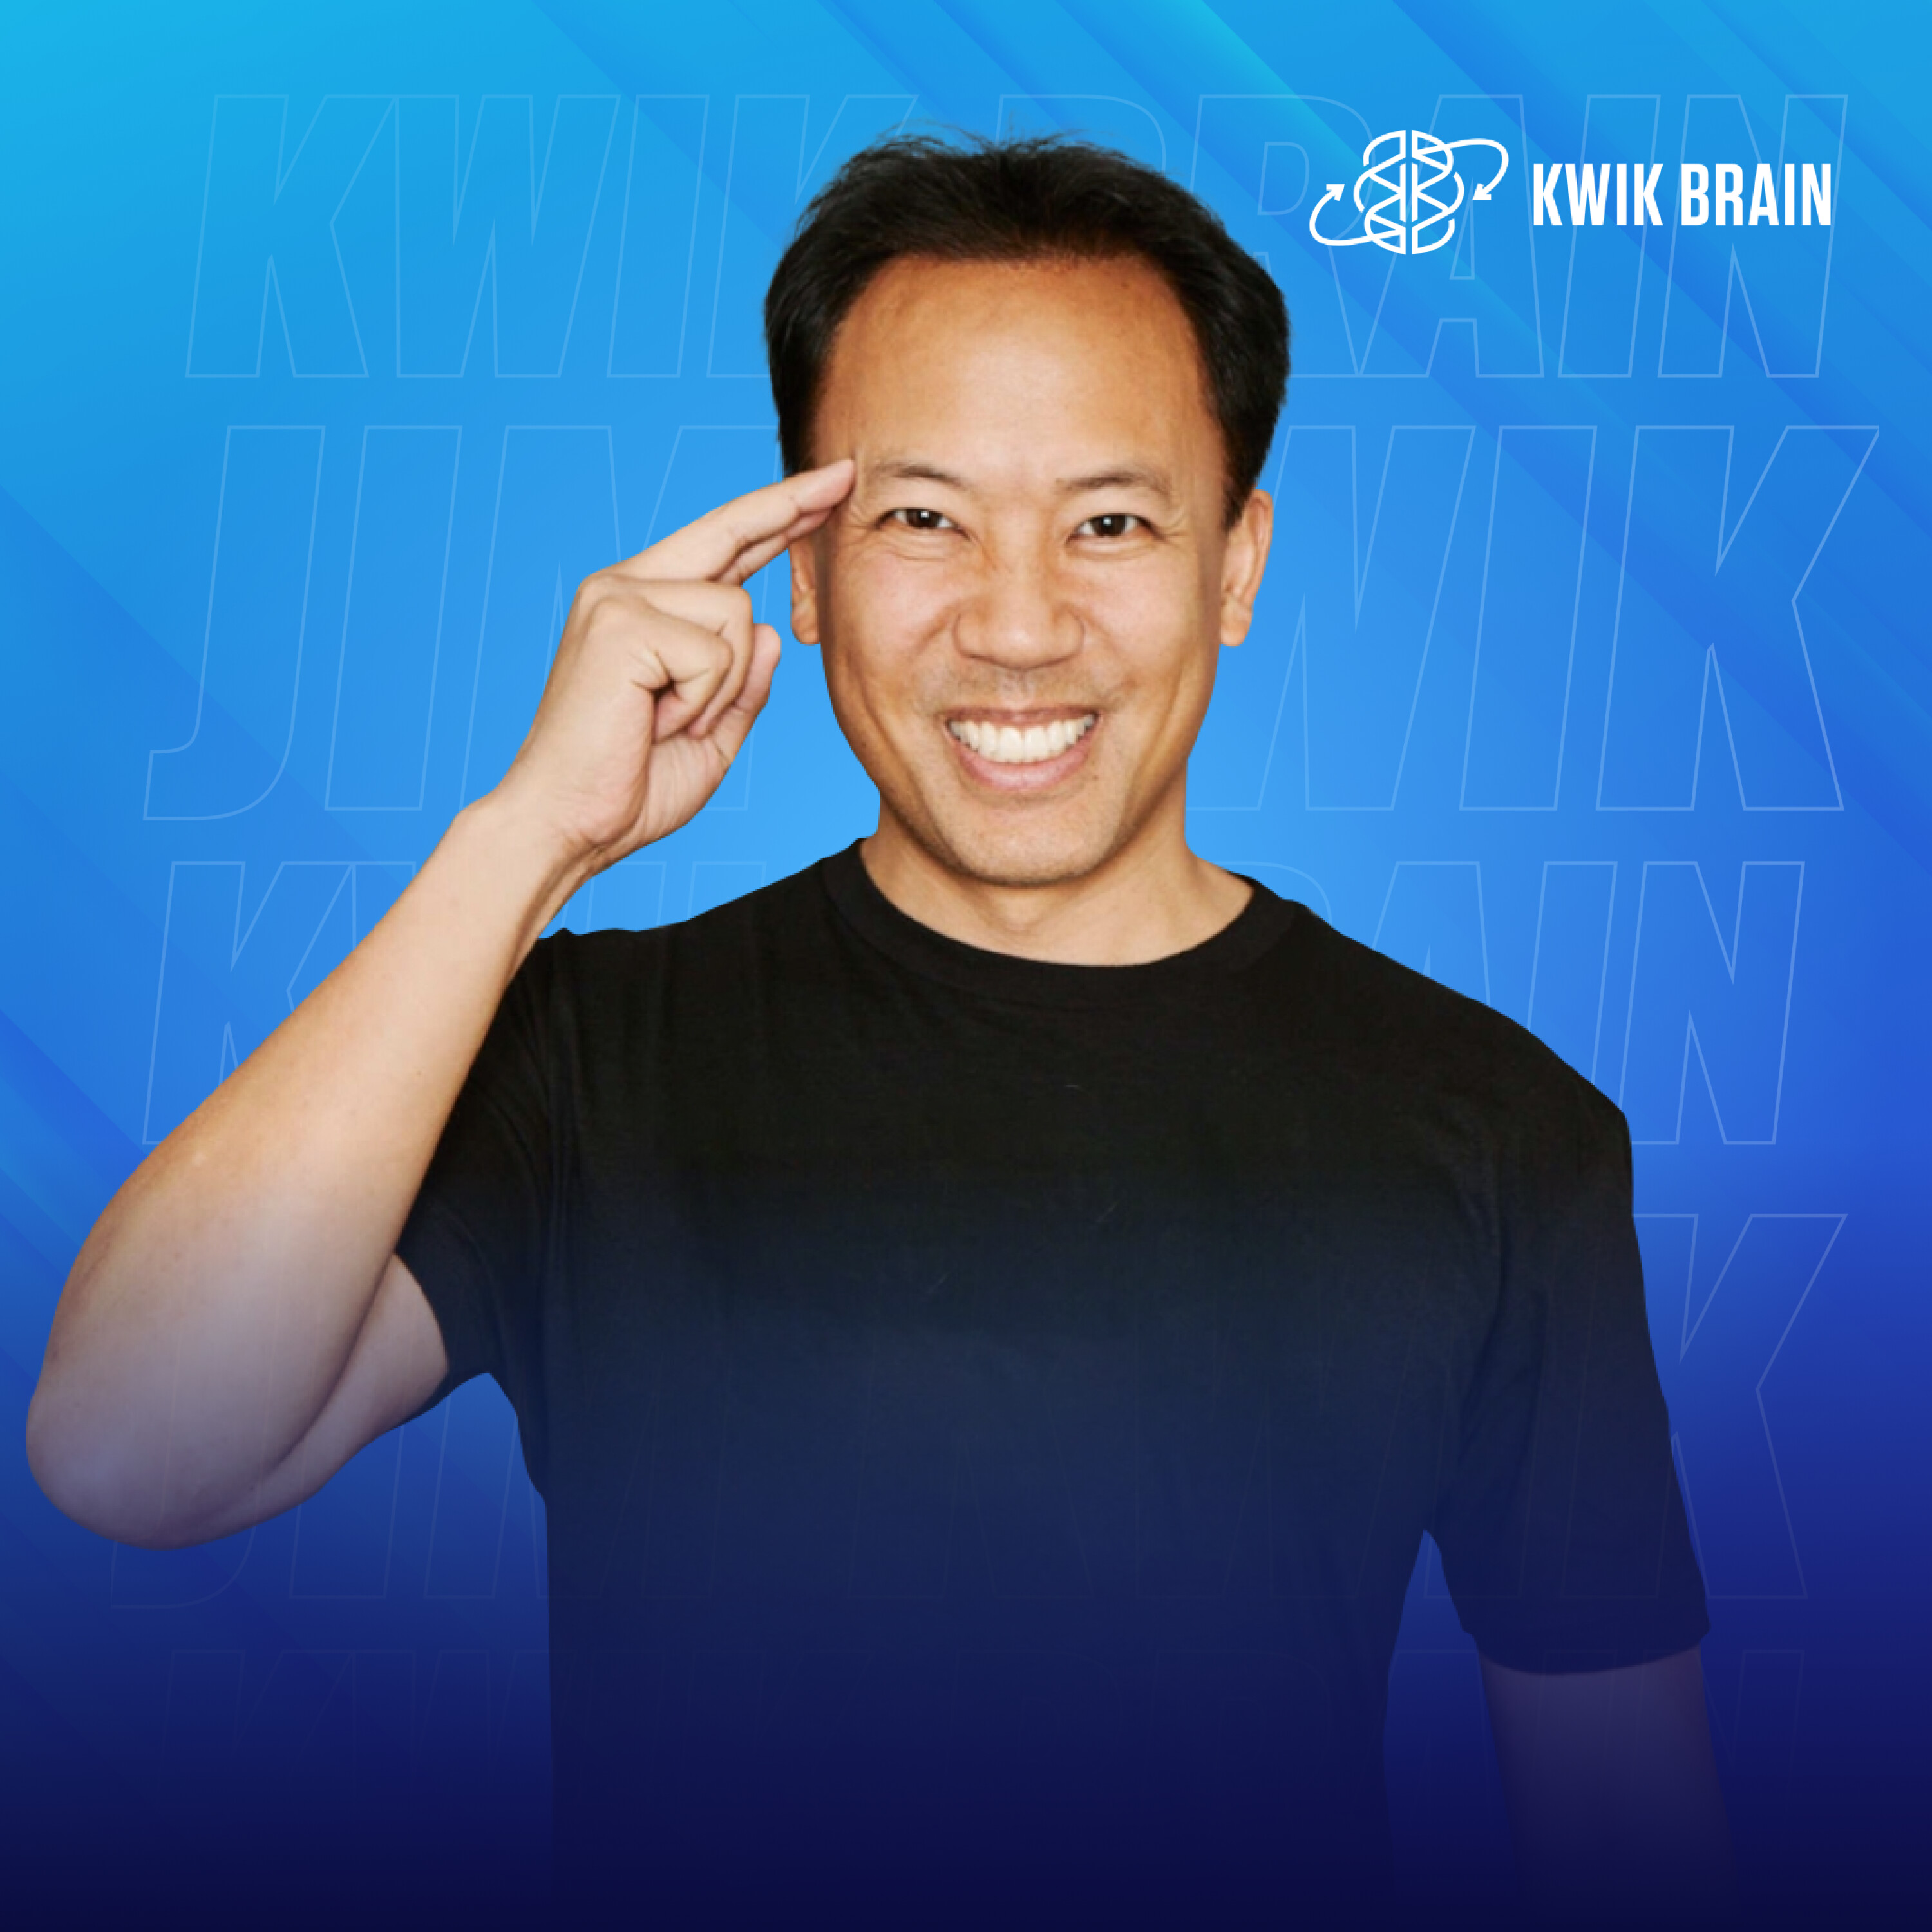 5 Tips to Start Lucid Dreaming and Control Your Own Dreams with Jim Kwik